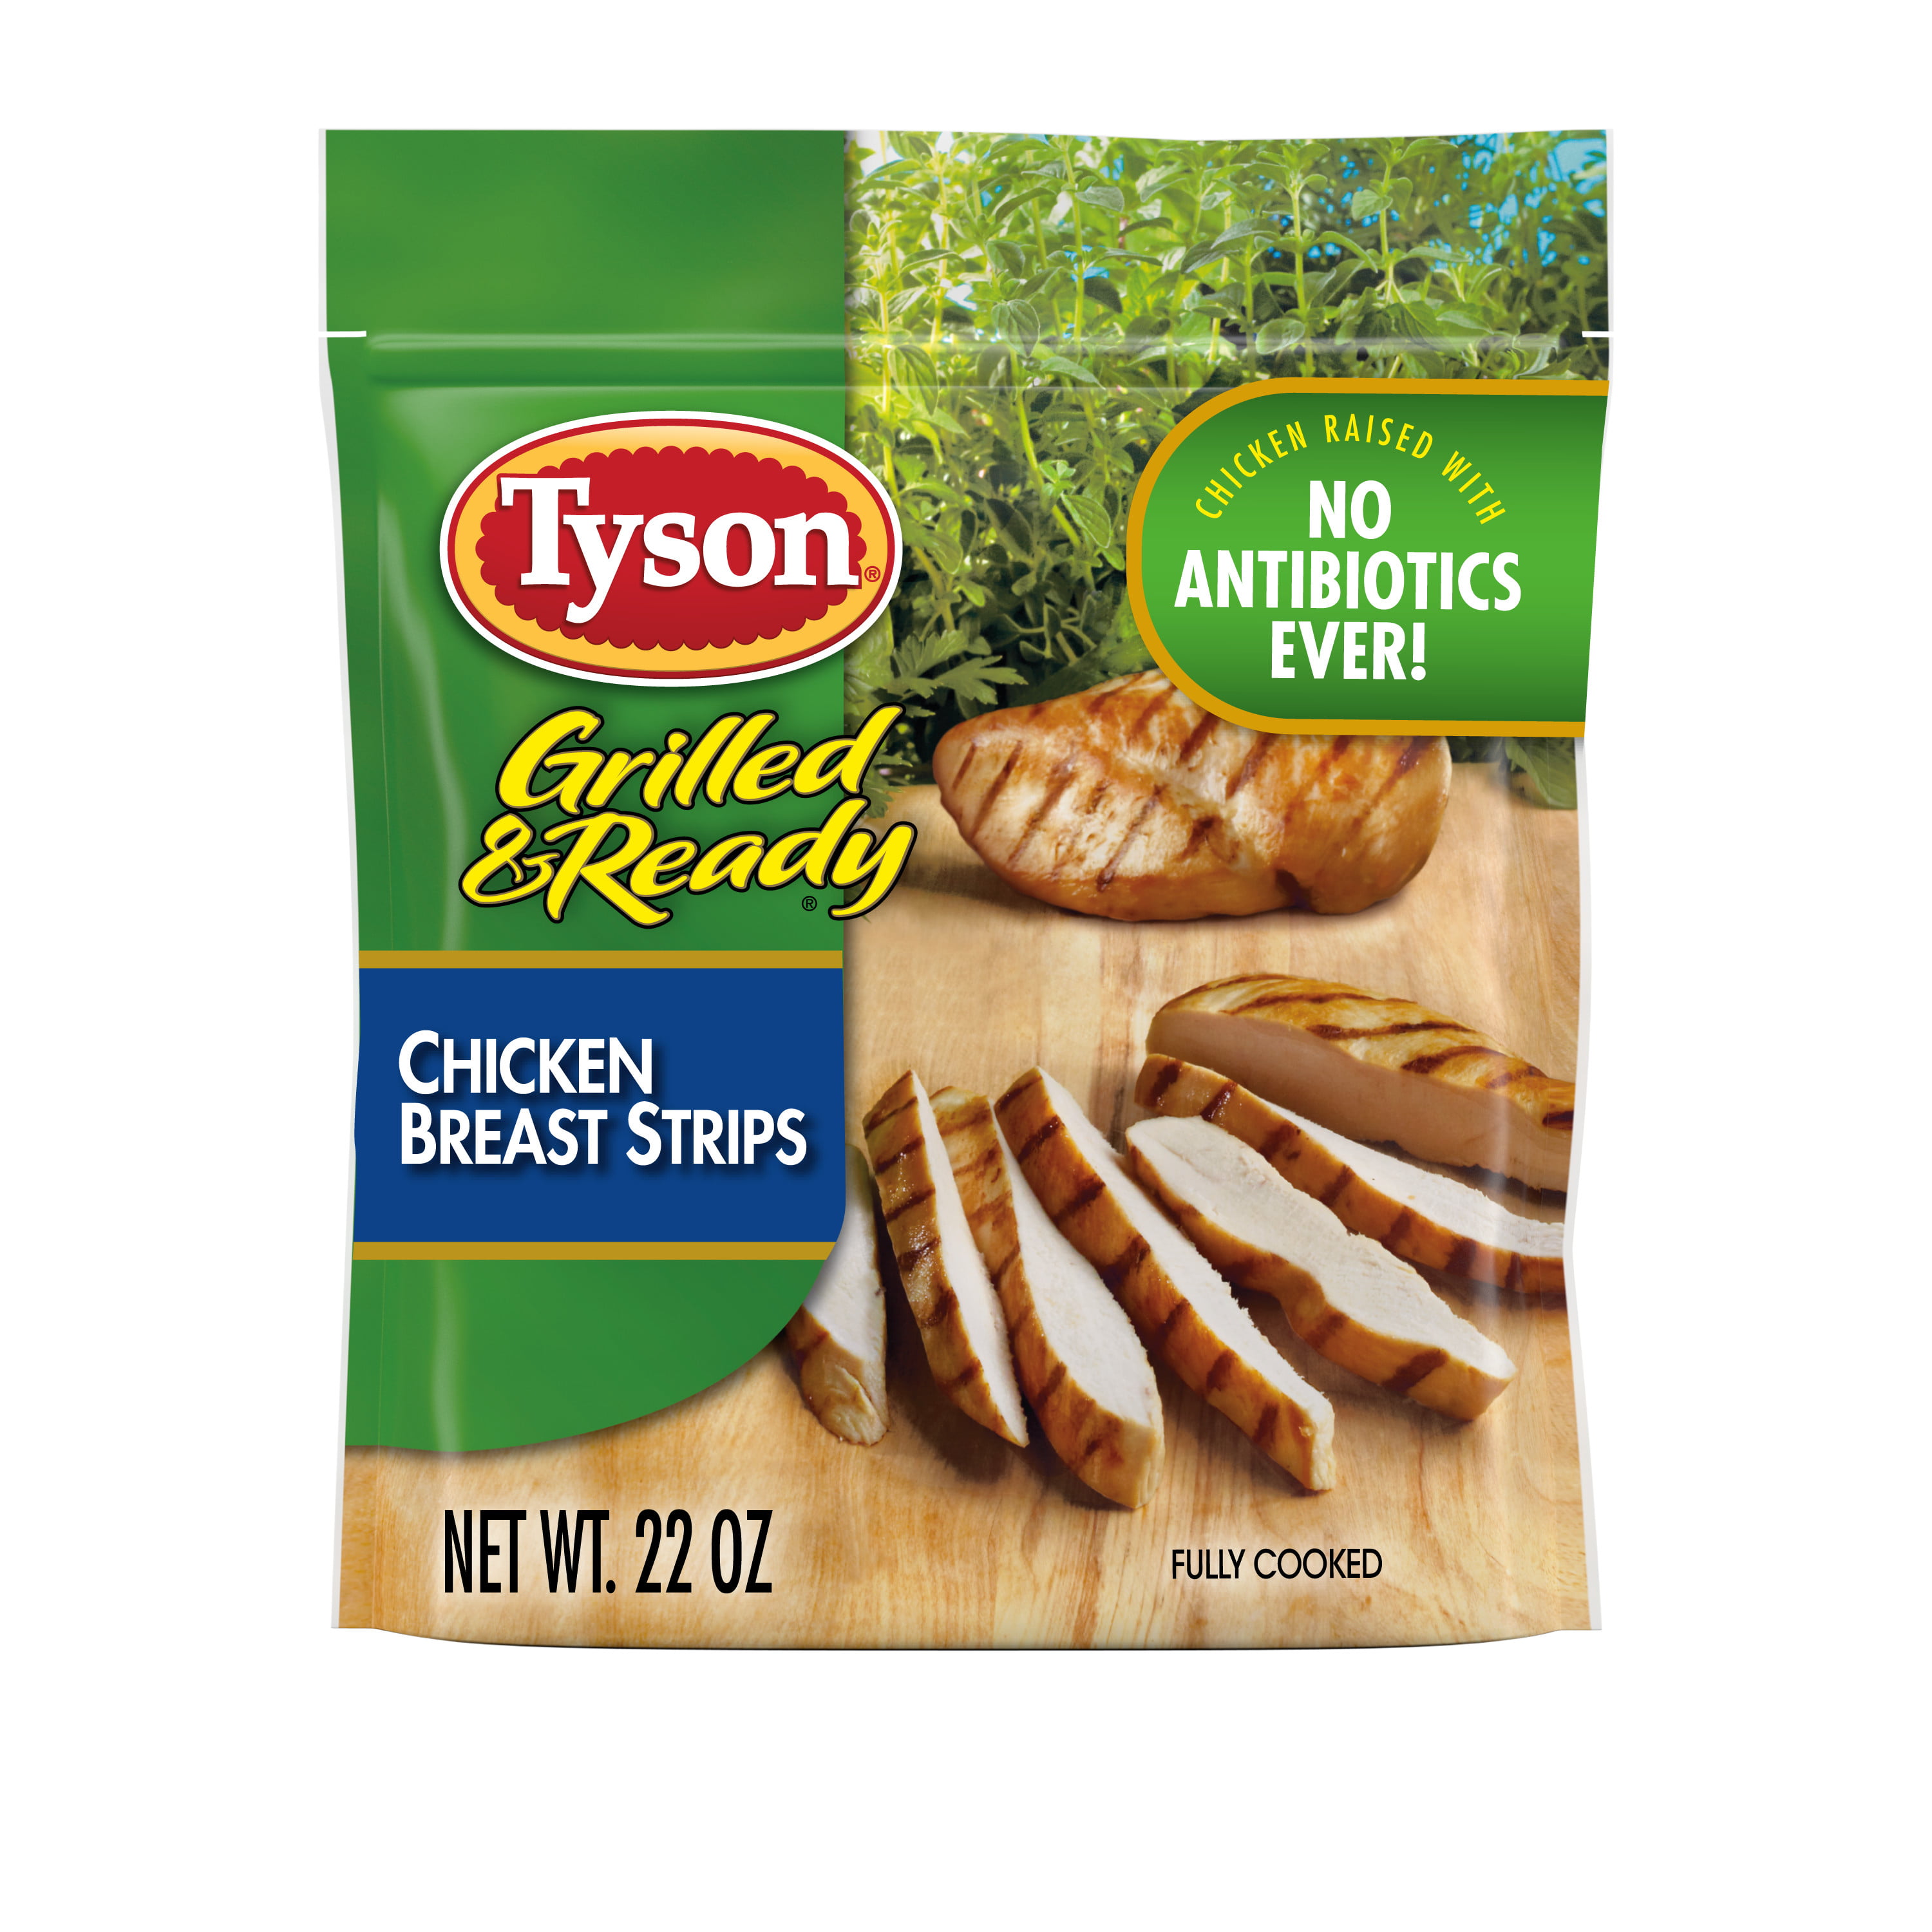 Tyson Grilled & Ready Fully Cooked Chicken Breast Strips ...